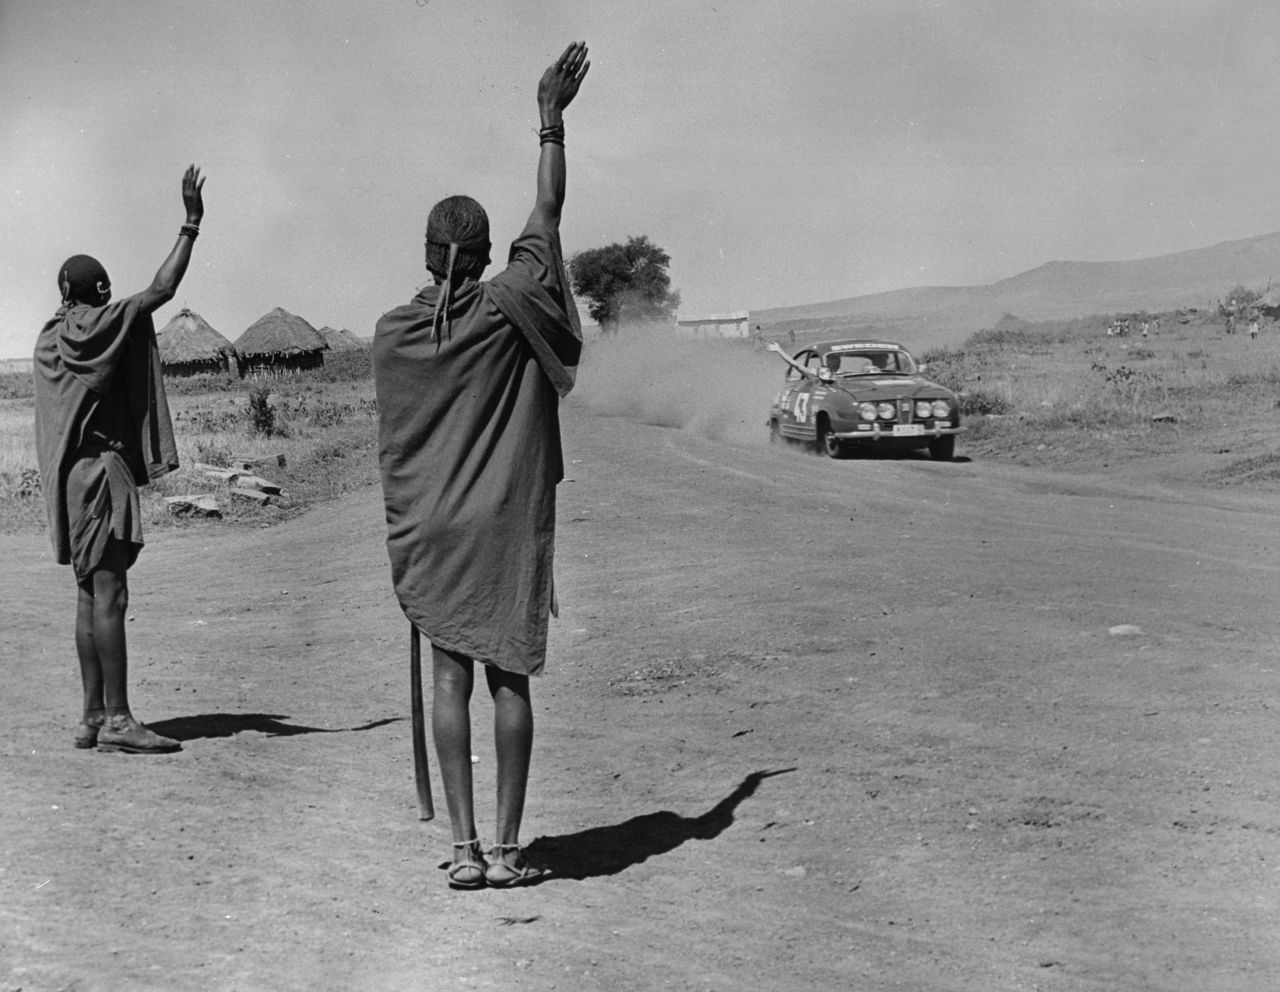 Competitors<strong> </strong>Pat Moss-Carlsson and Elizabeth Nystrom exchange a wave with Maasai onlookers during practice for the 1966 East African Safari Rally.